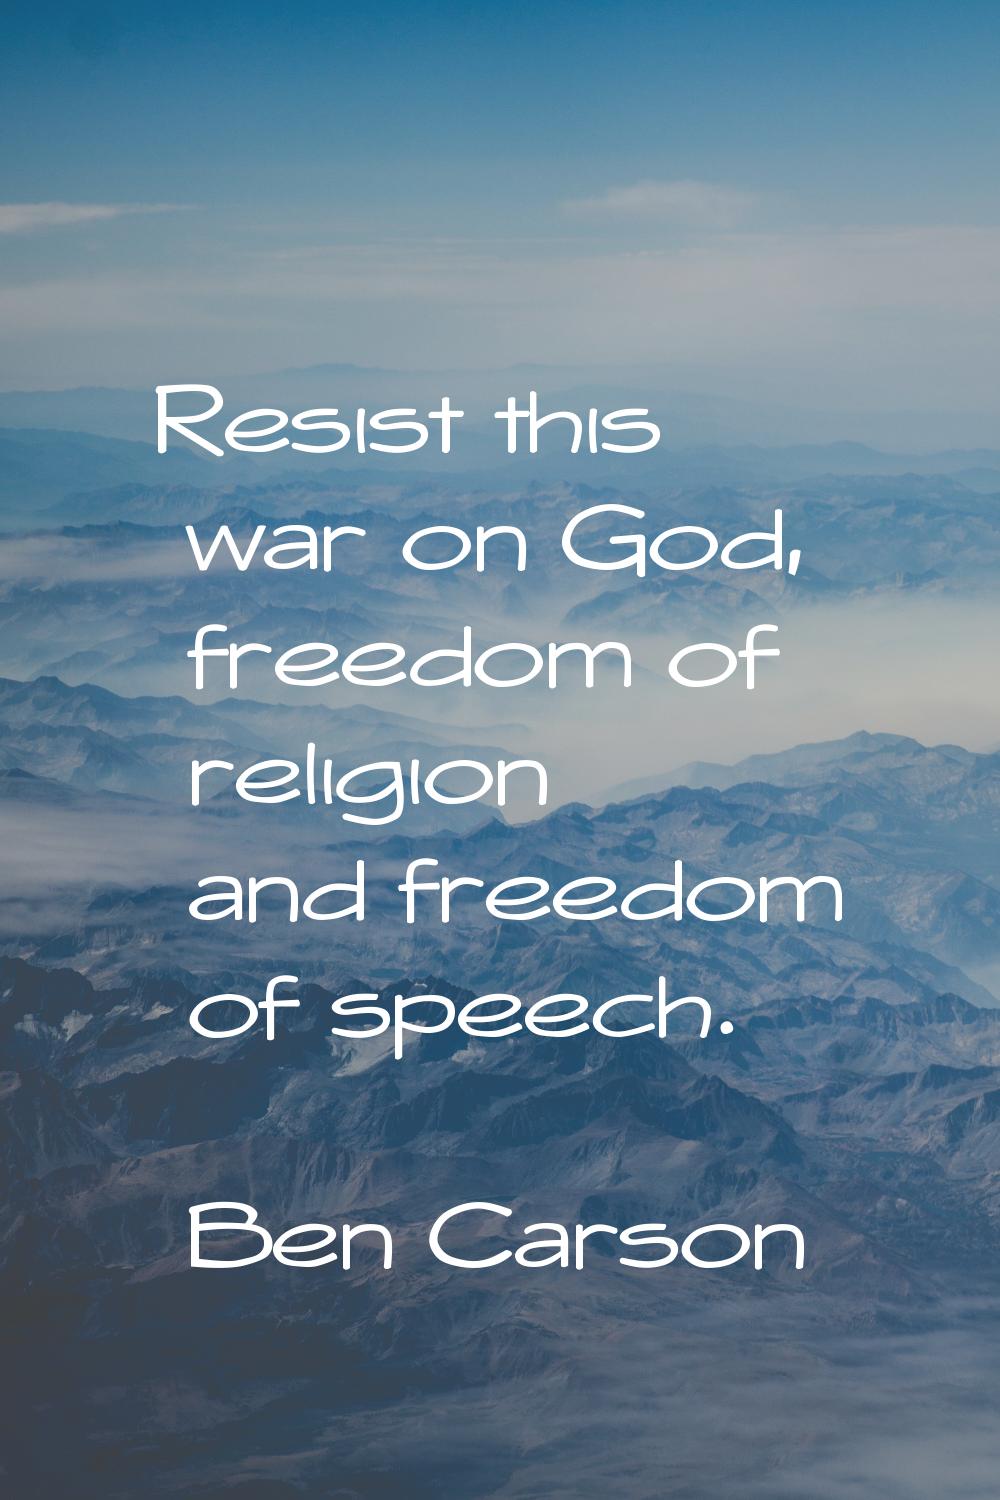 Resist this war on God, freedom of religion and freedom of speech.